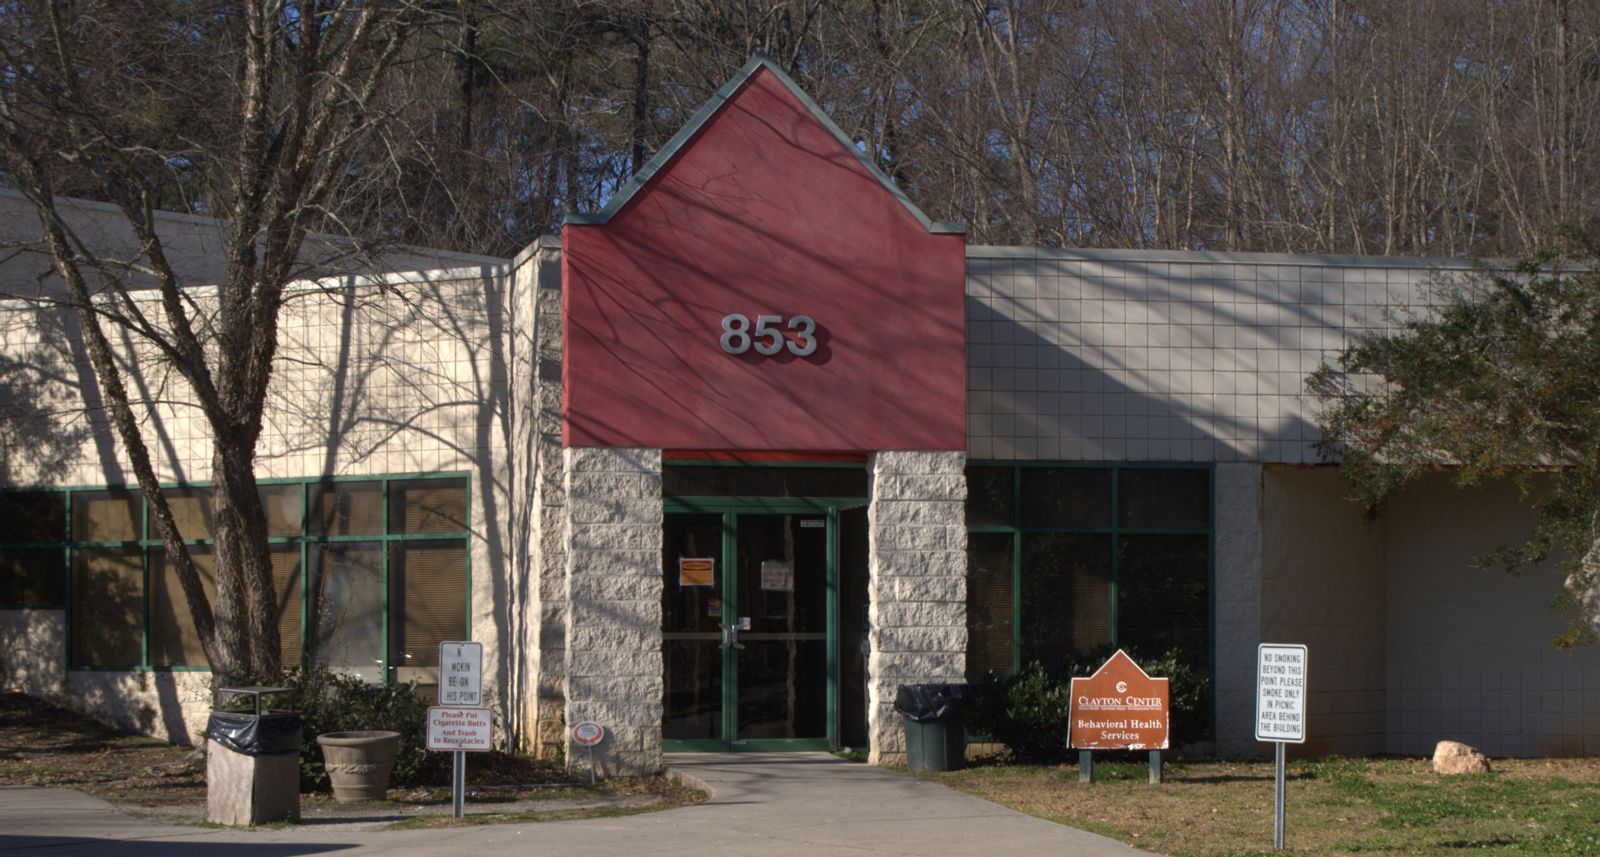 The Adult Day Services is located at 1800 Slate Road in Conley, Georgia.